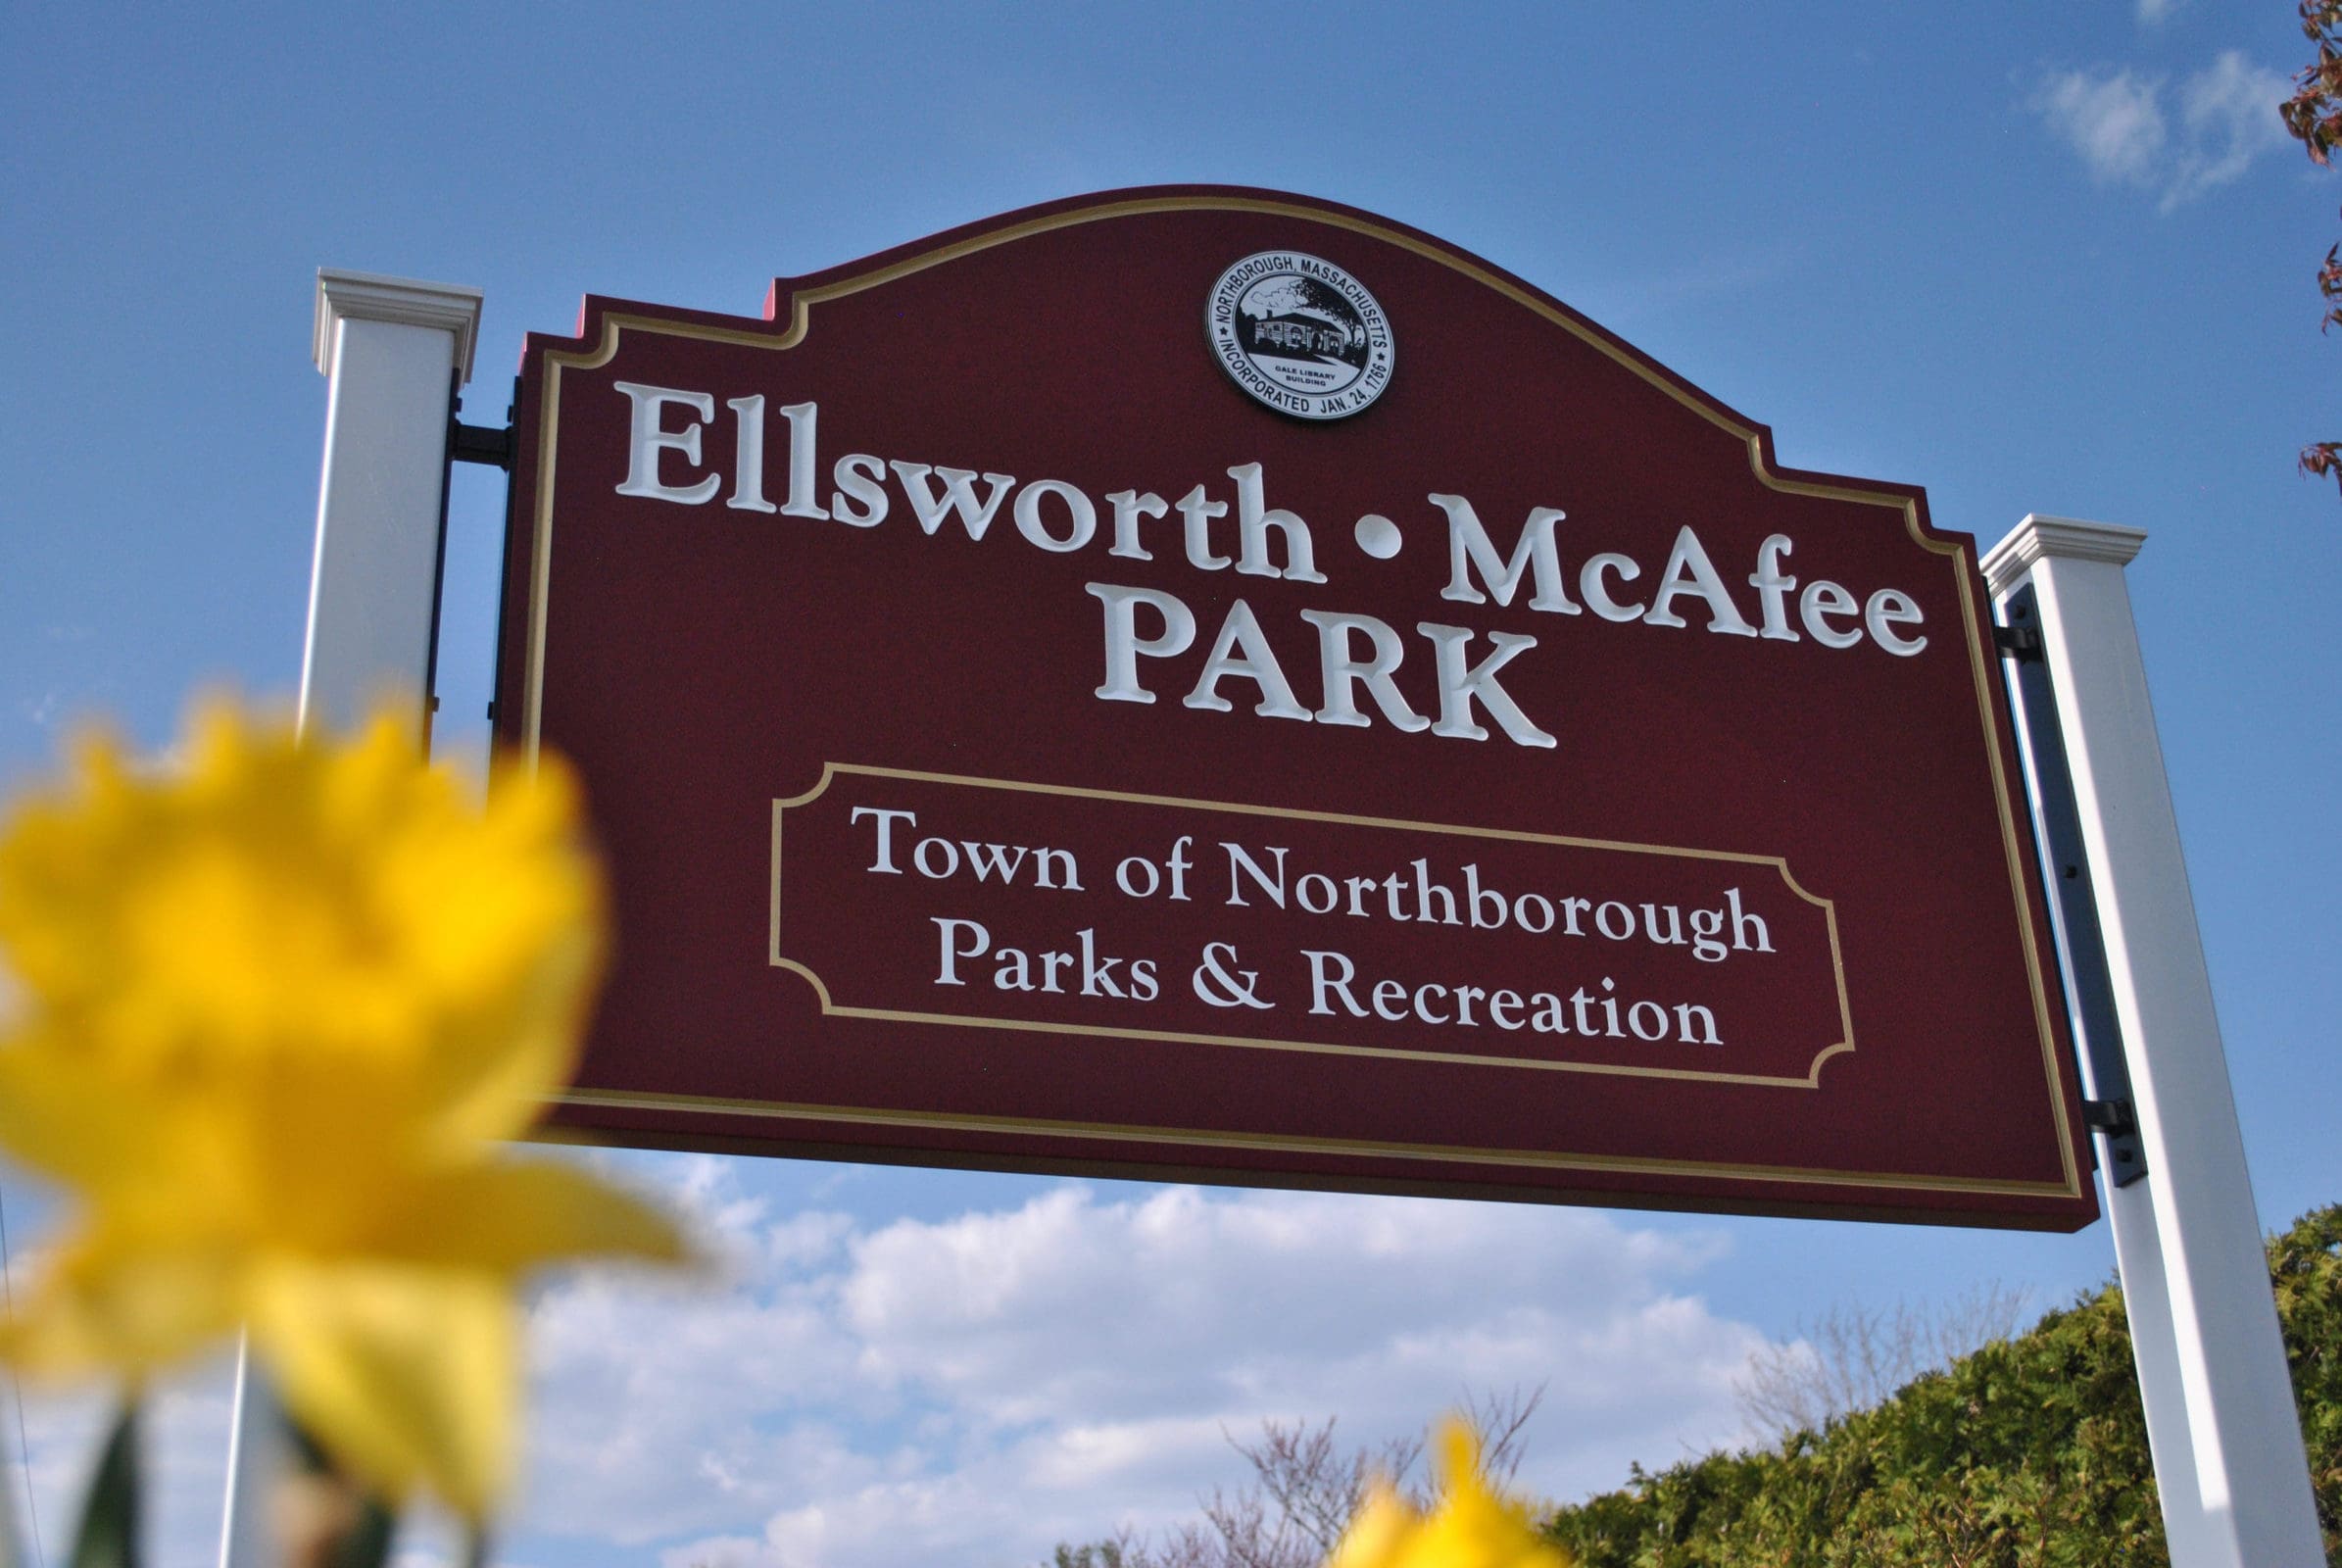 Ellsworth McAfee Park is at 363 South St. in Northborough.